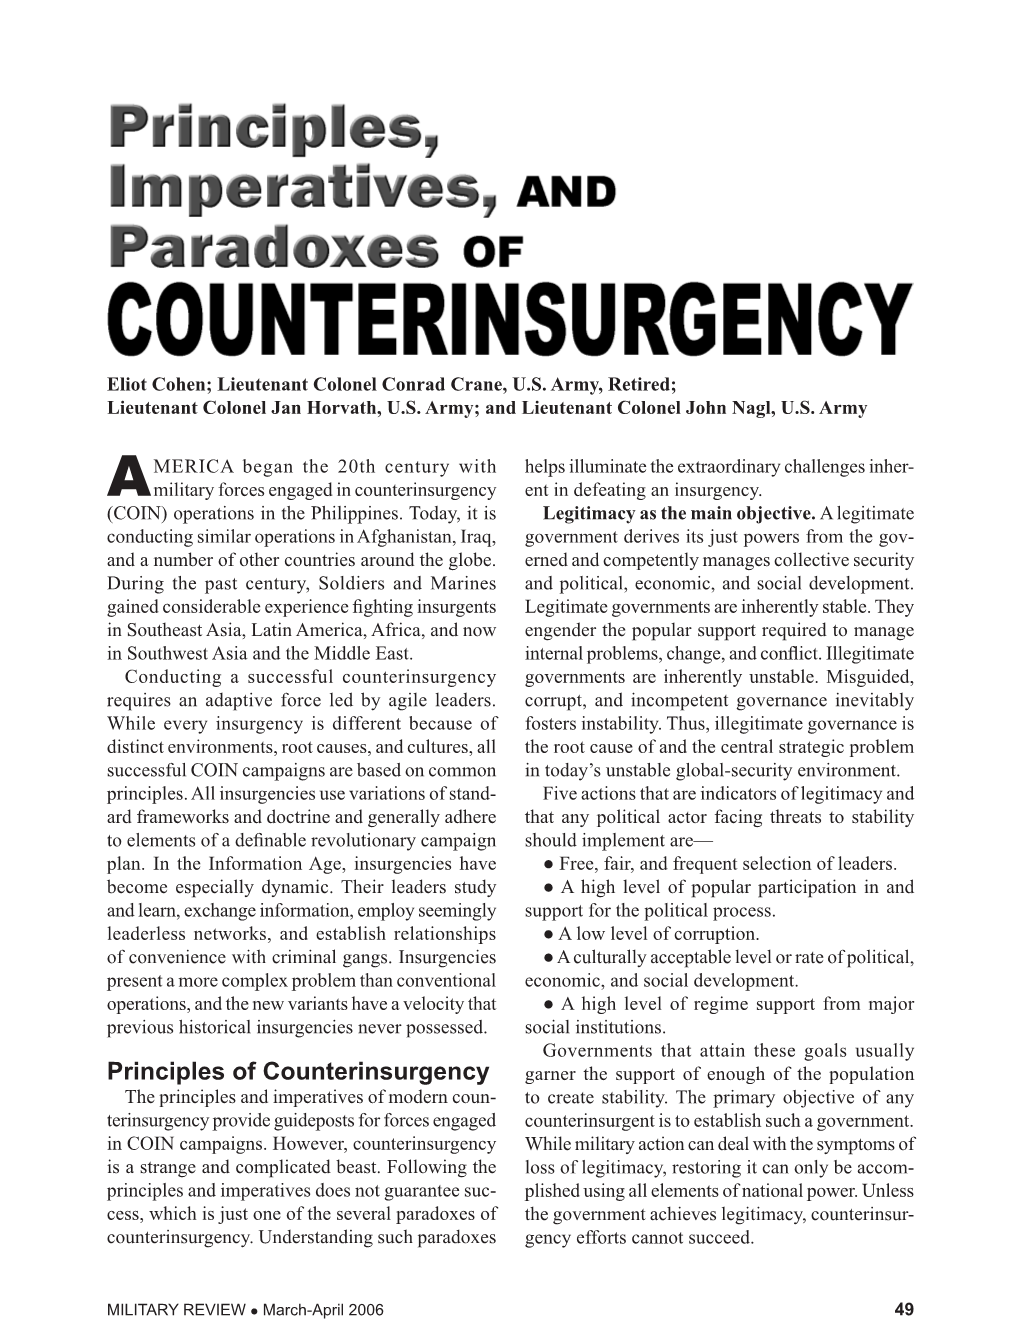 Principles of Counterinsurgency Garner the Support of Enough of the Population the Principles and Imperatives of Modern Coun­ to Create Stability